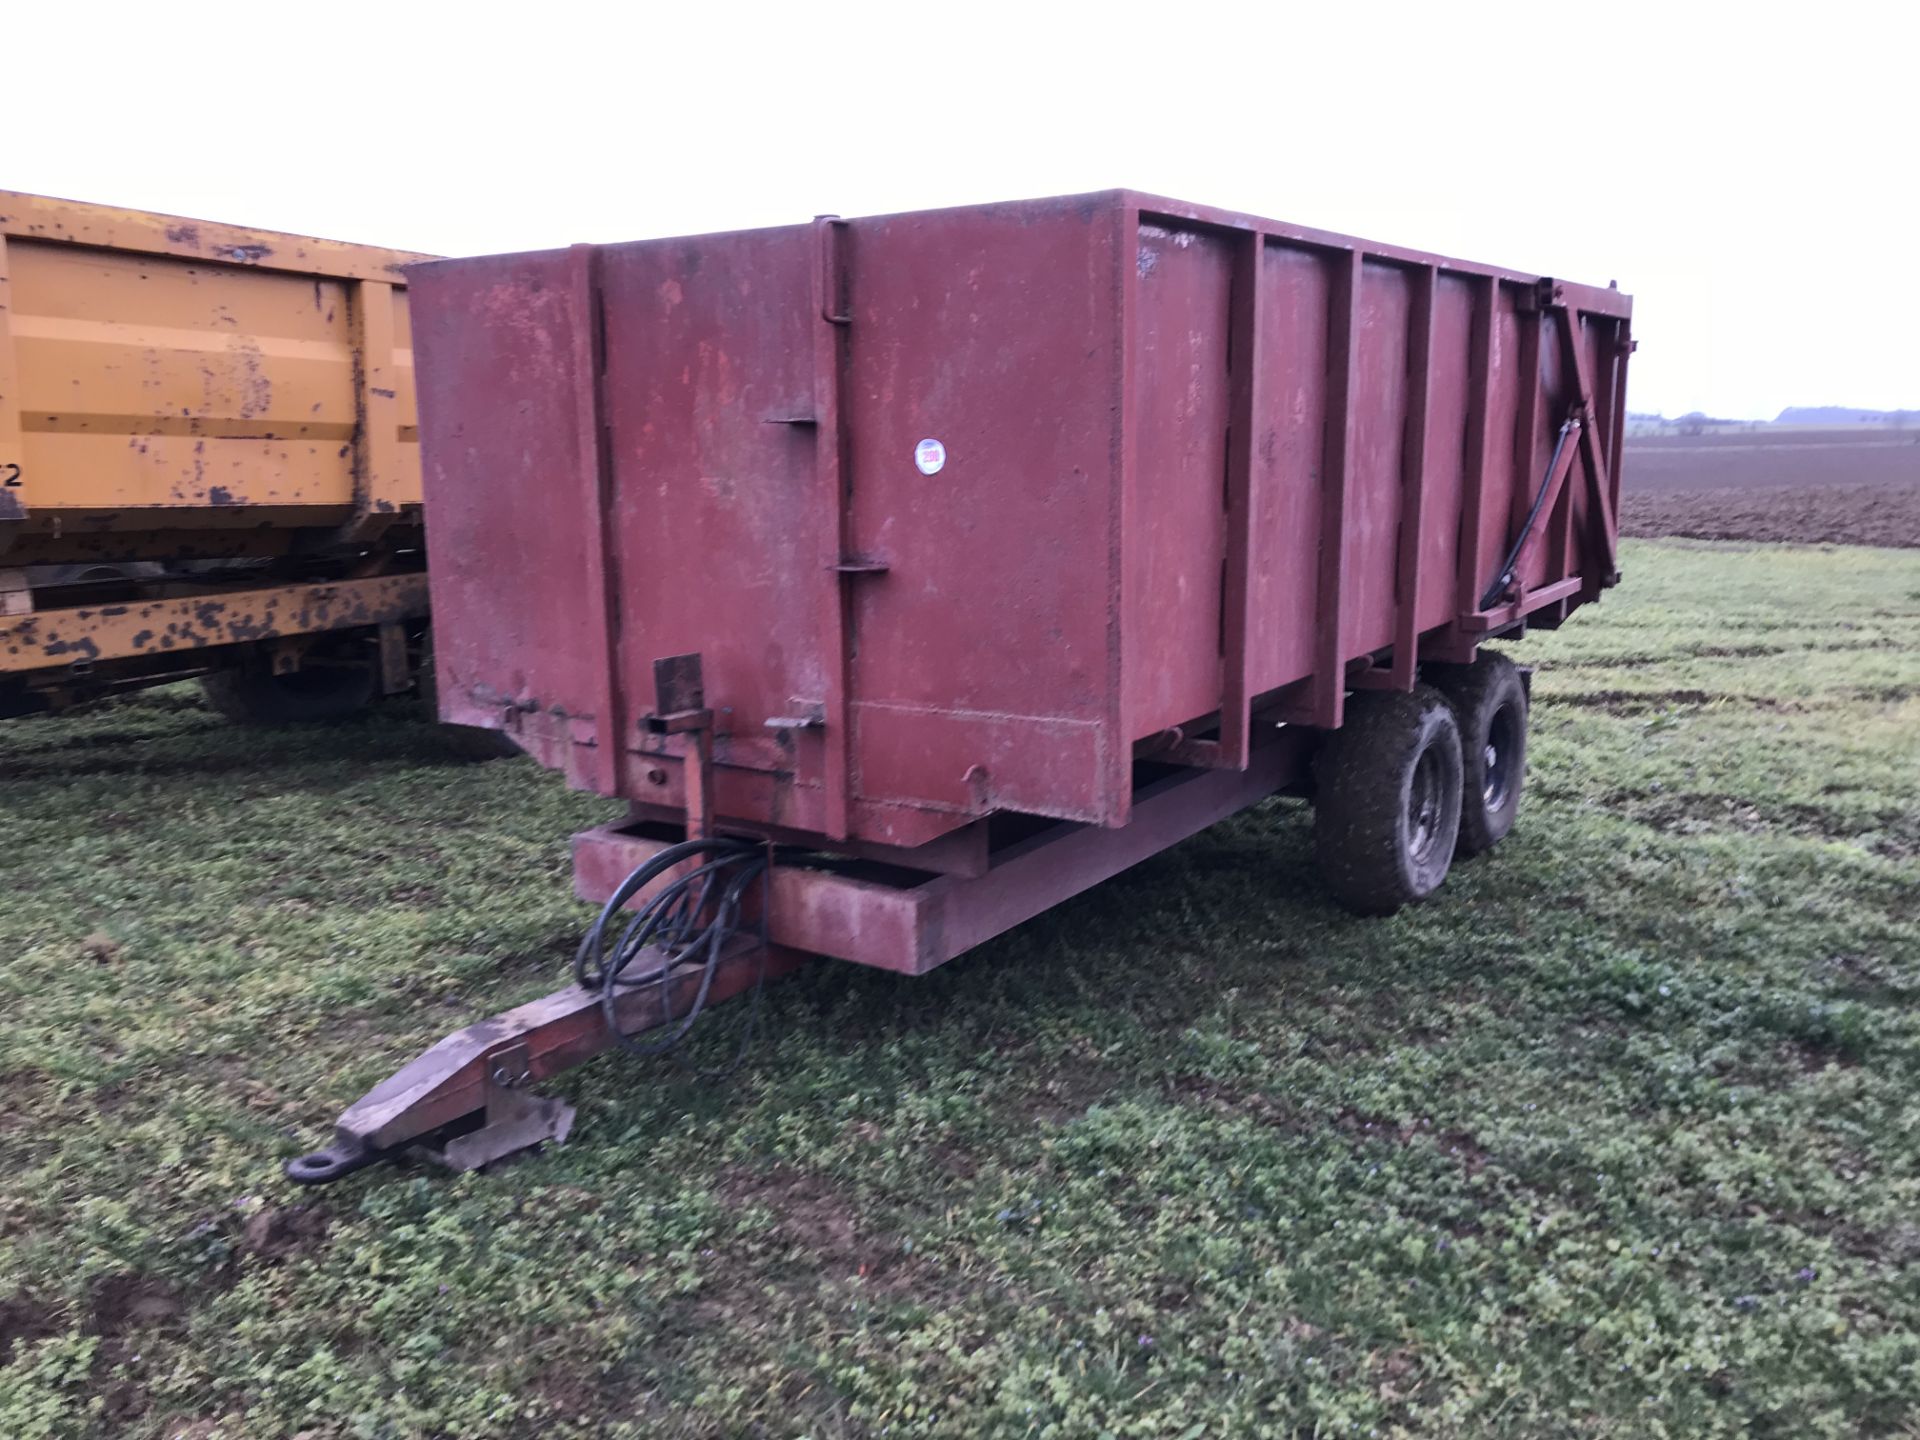 Easterby 8 tonnes tandem axle tipping Trailer c/w hydraulic tailgate.